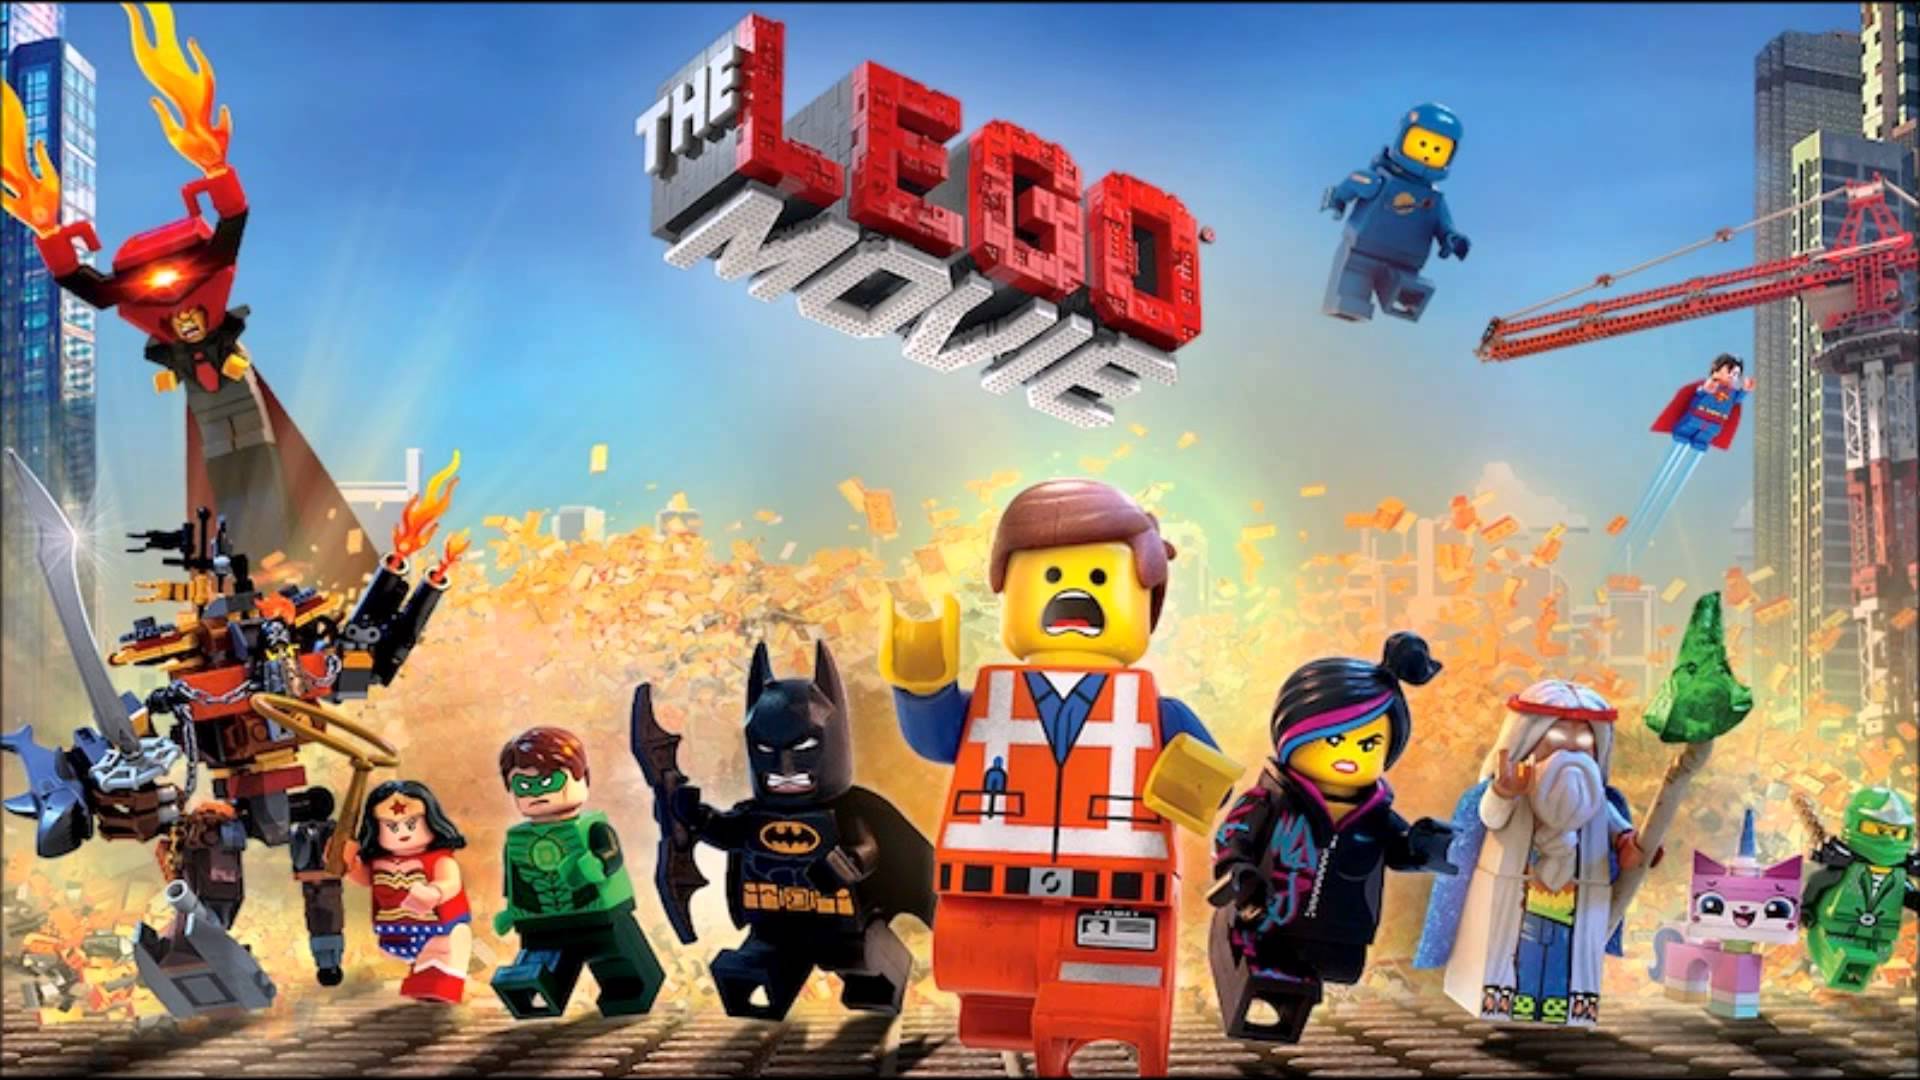 Everything Is Awesome! 10 minutes version of the Lego Movie